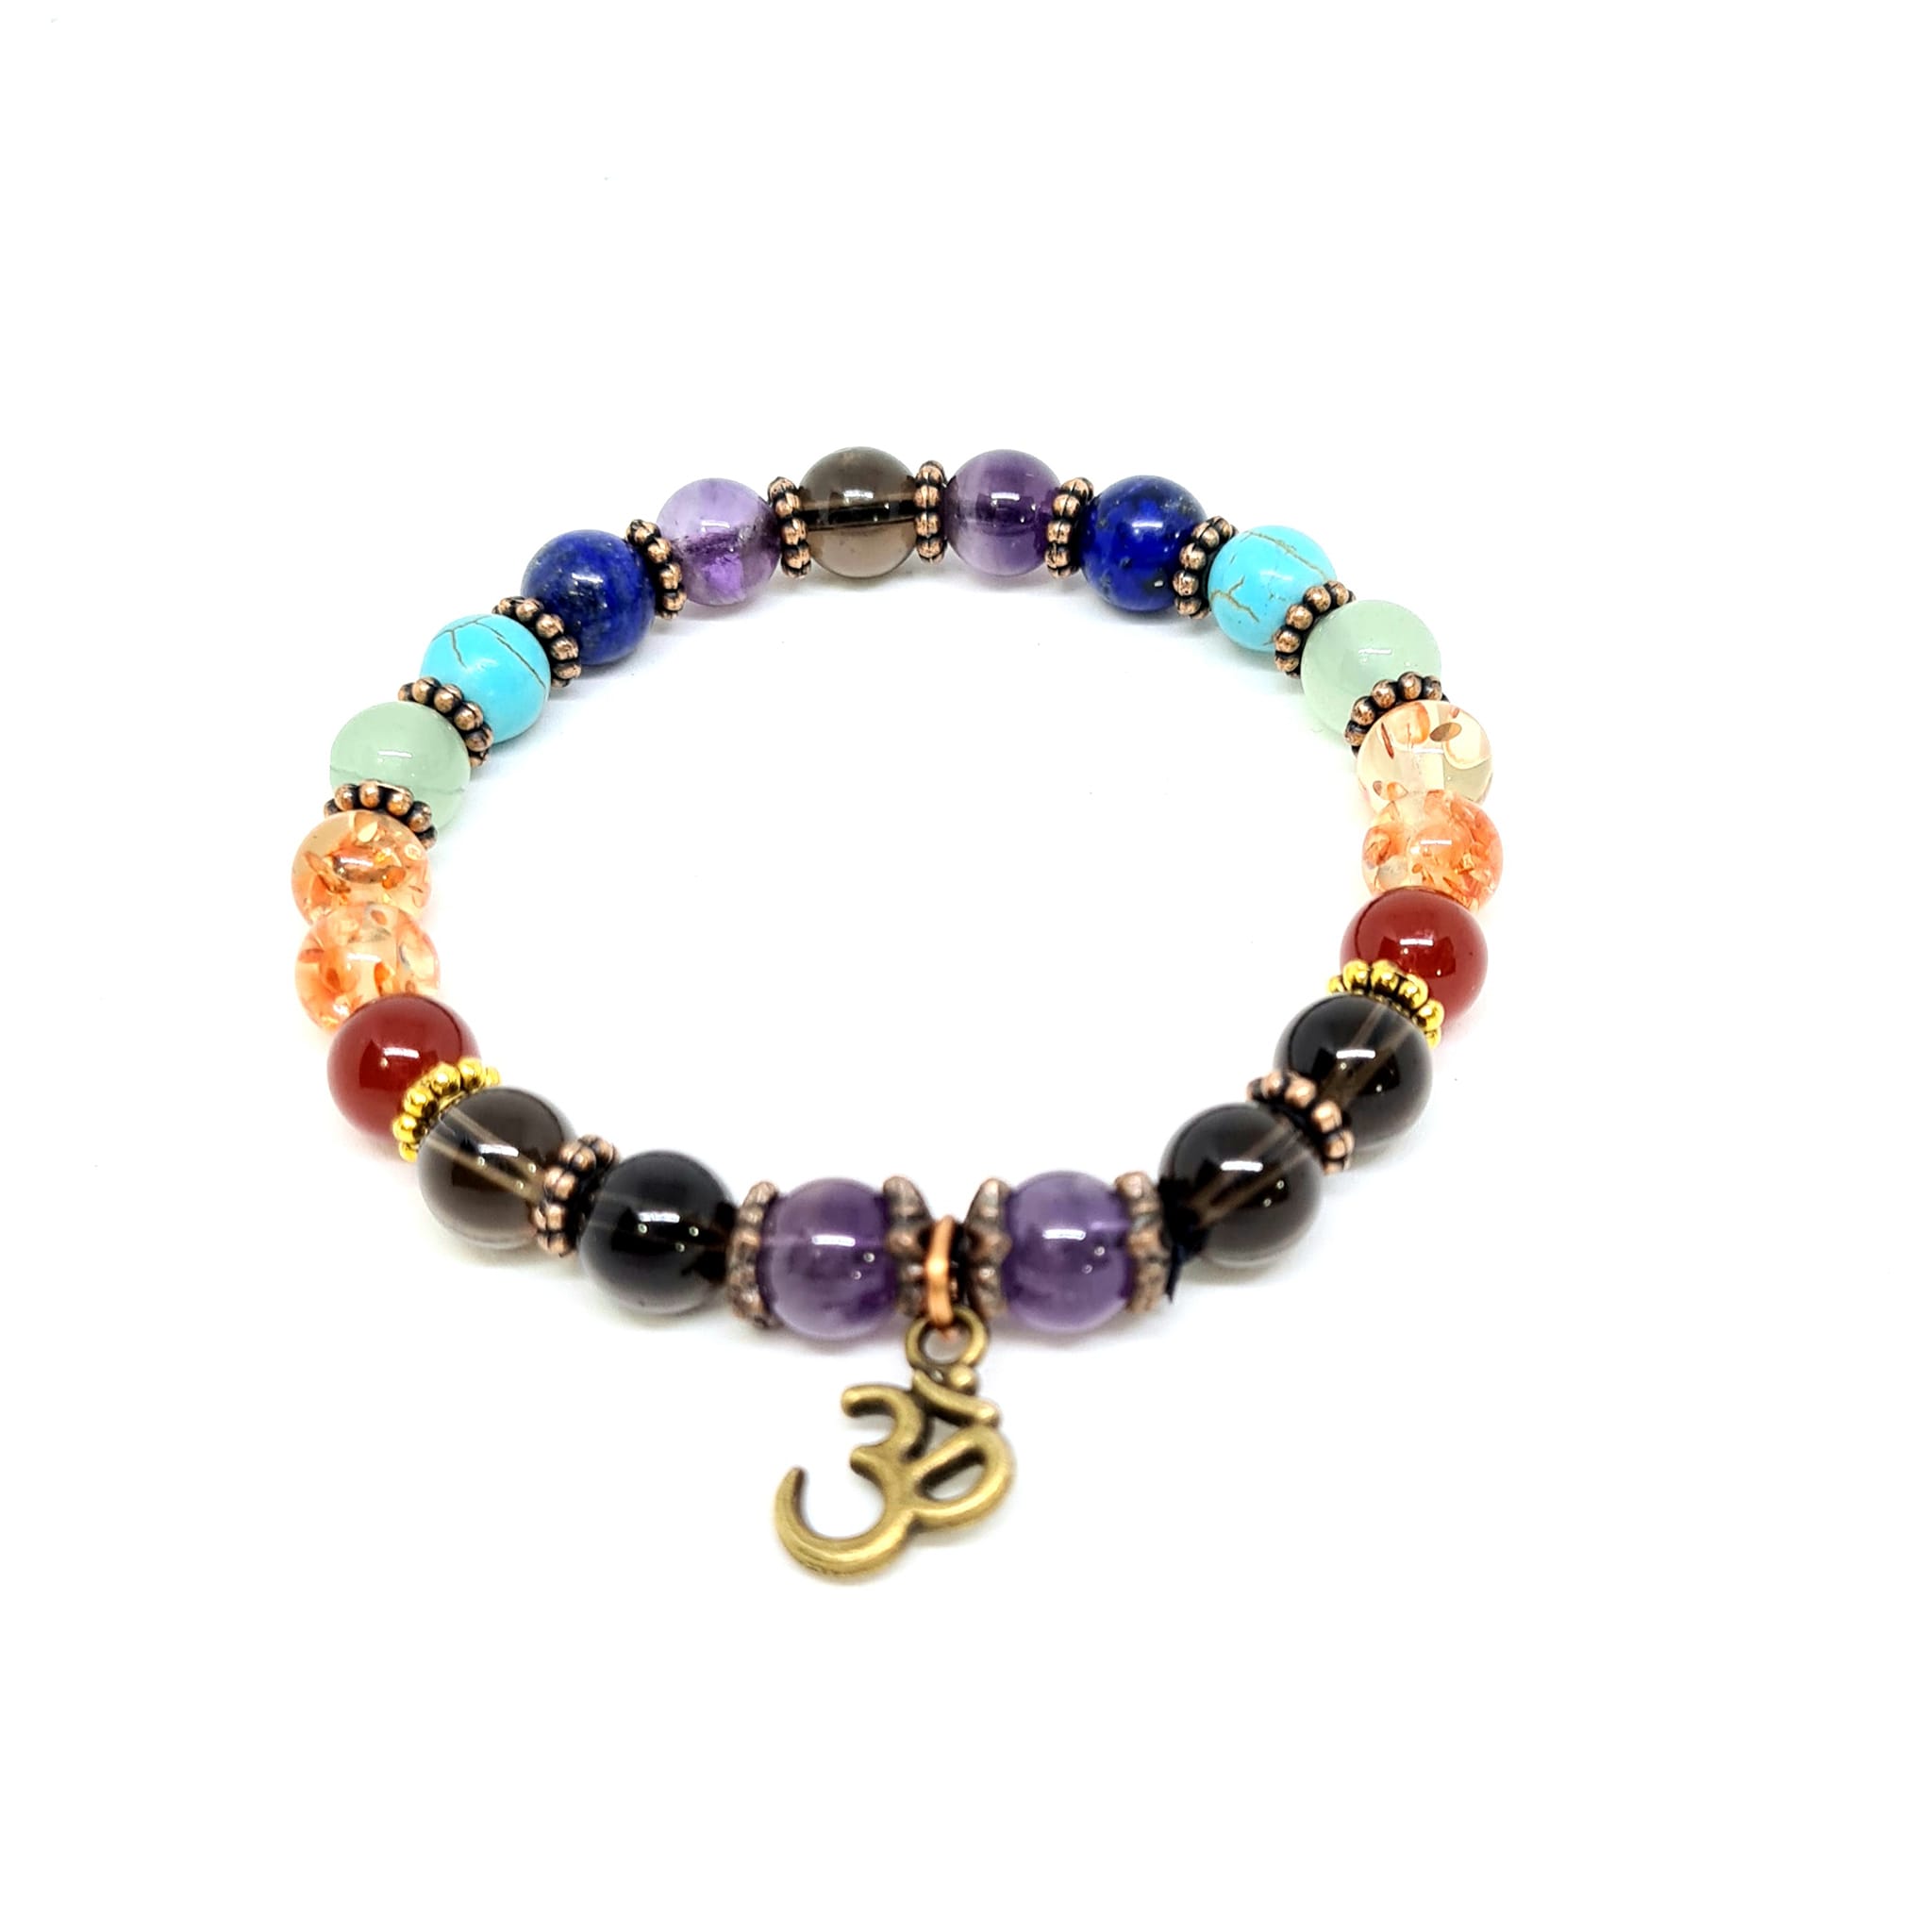 Dr. Beads | Copper Jewellery in Malaysia | Shop Online | Shop Copper Accessories - 7 Chakra Jewelry